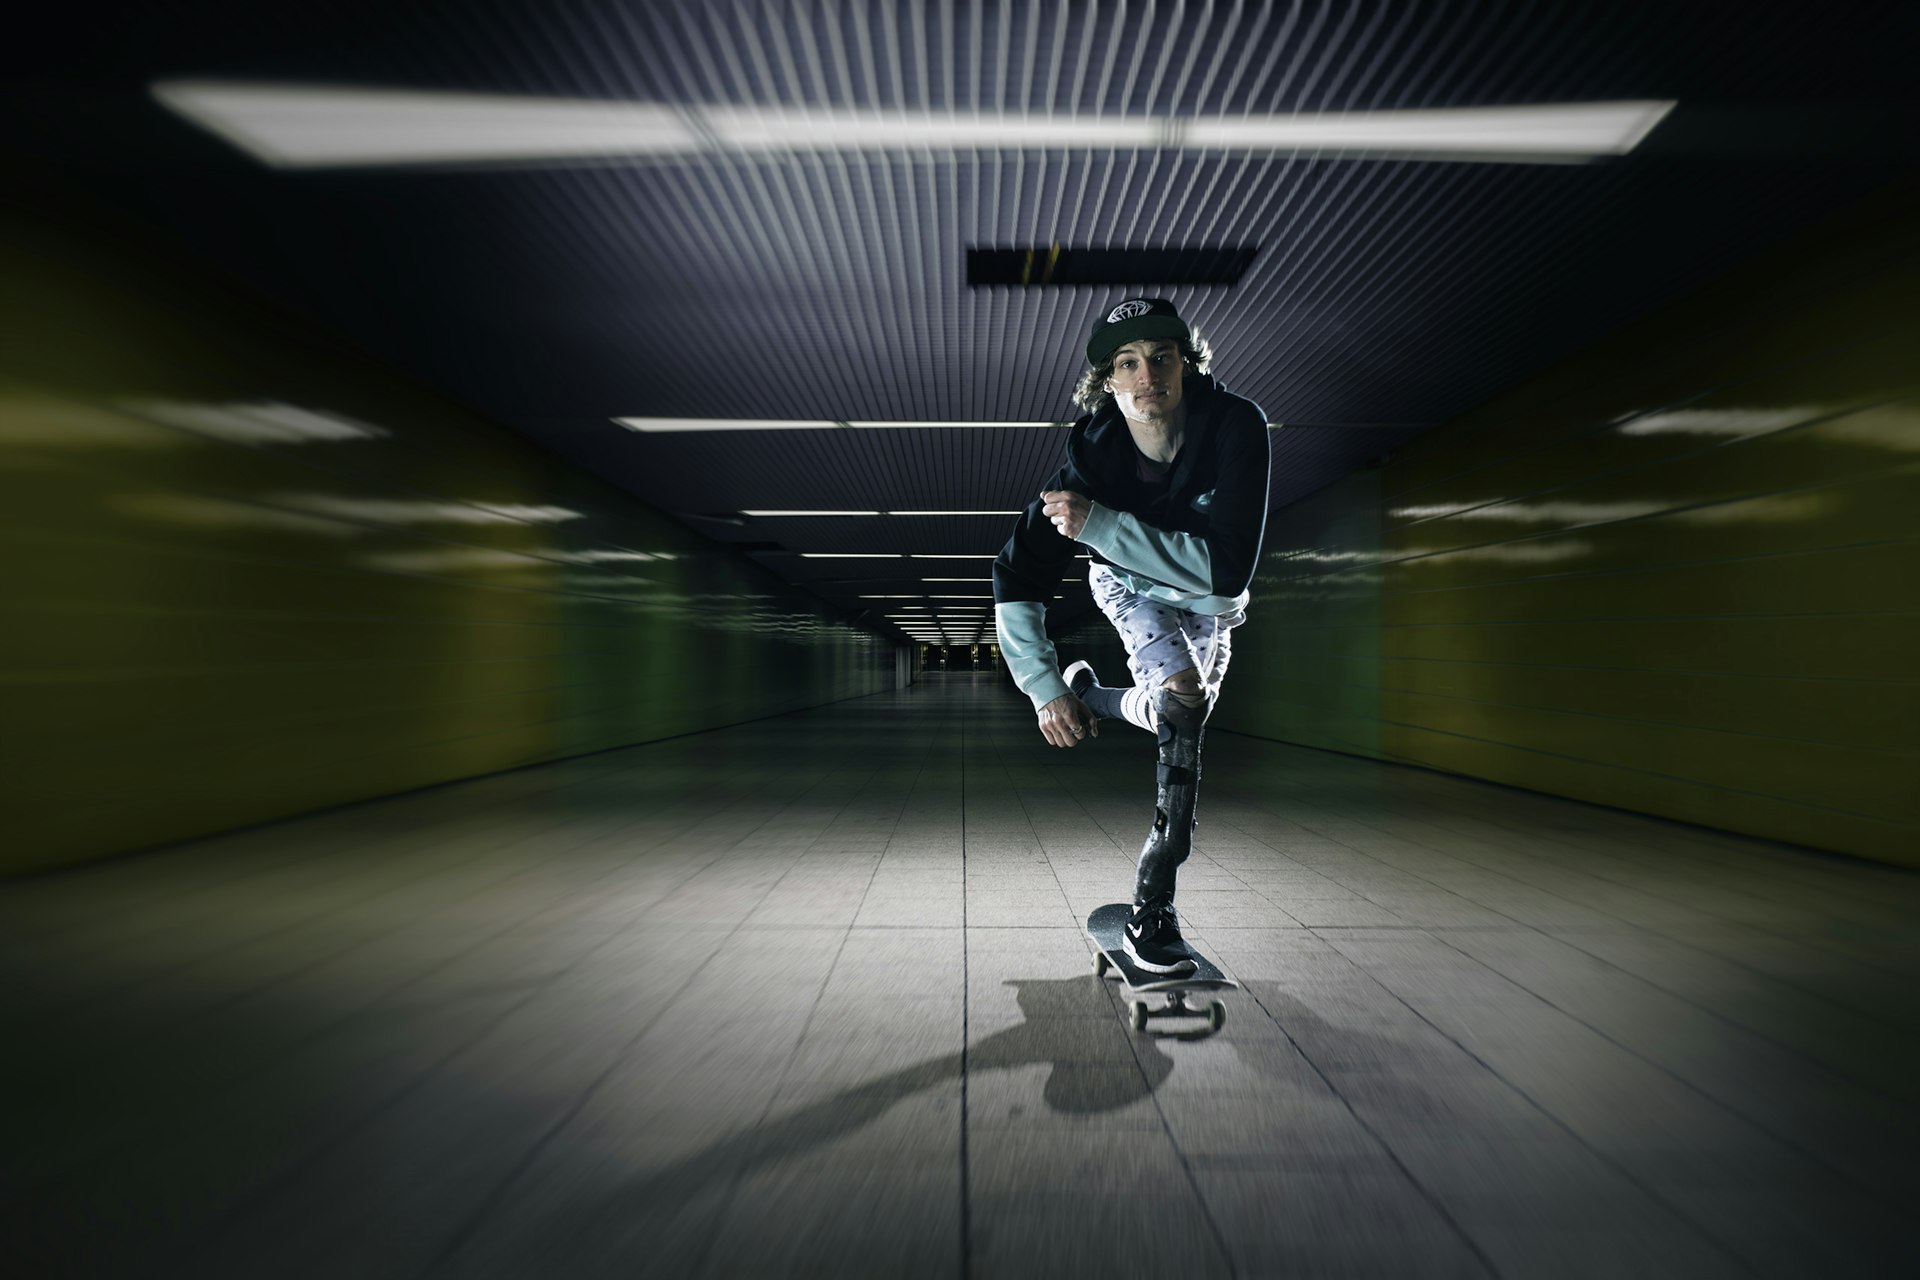 Skating through the pain and prosthetics